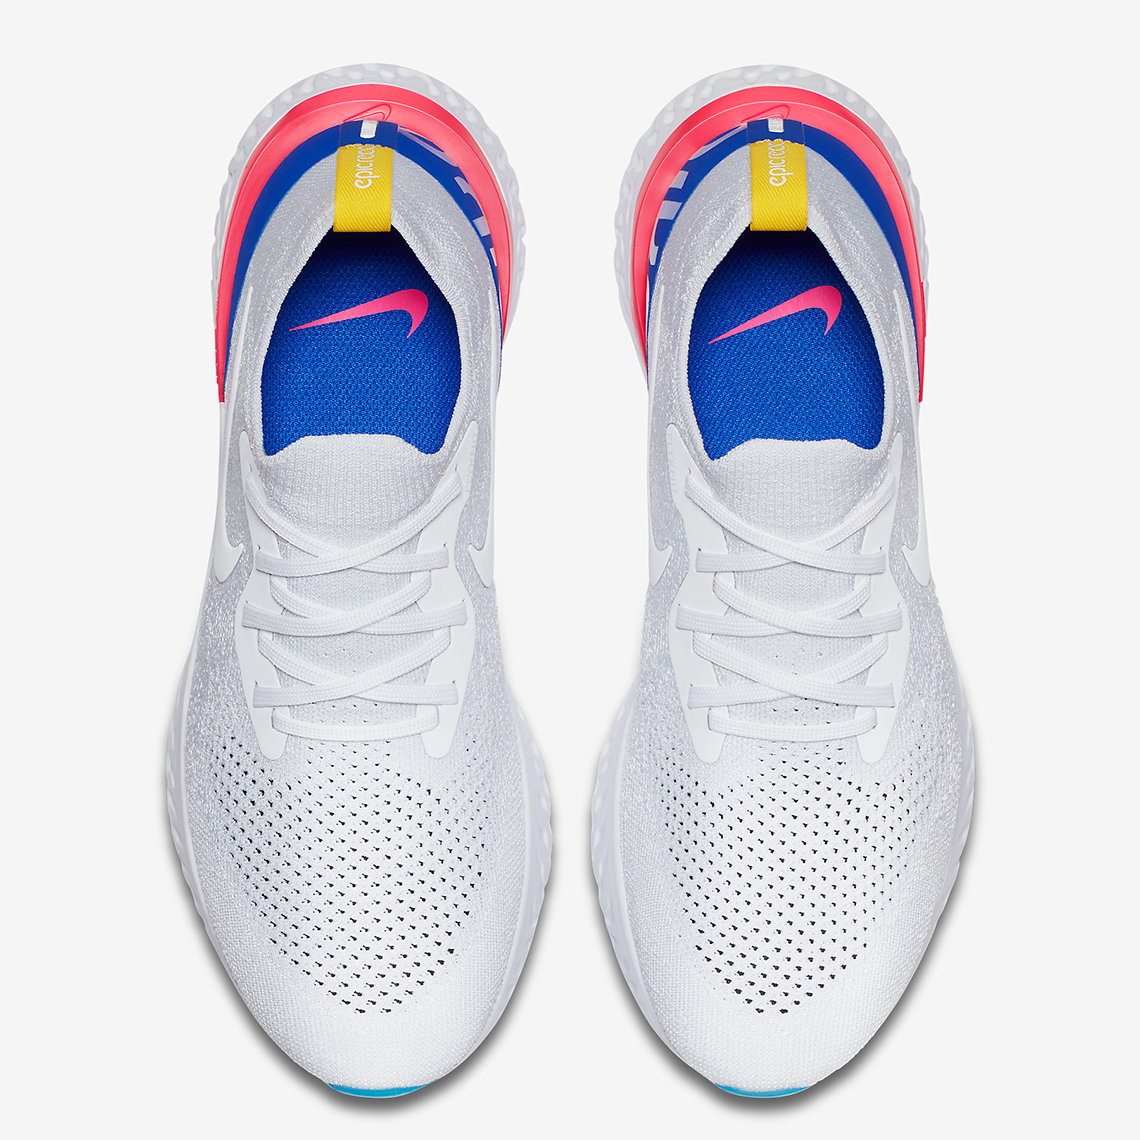 nike-epic-react-release-info-official-images-4.jpg